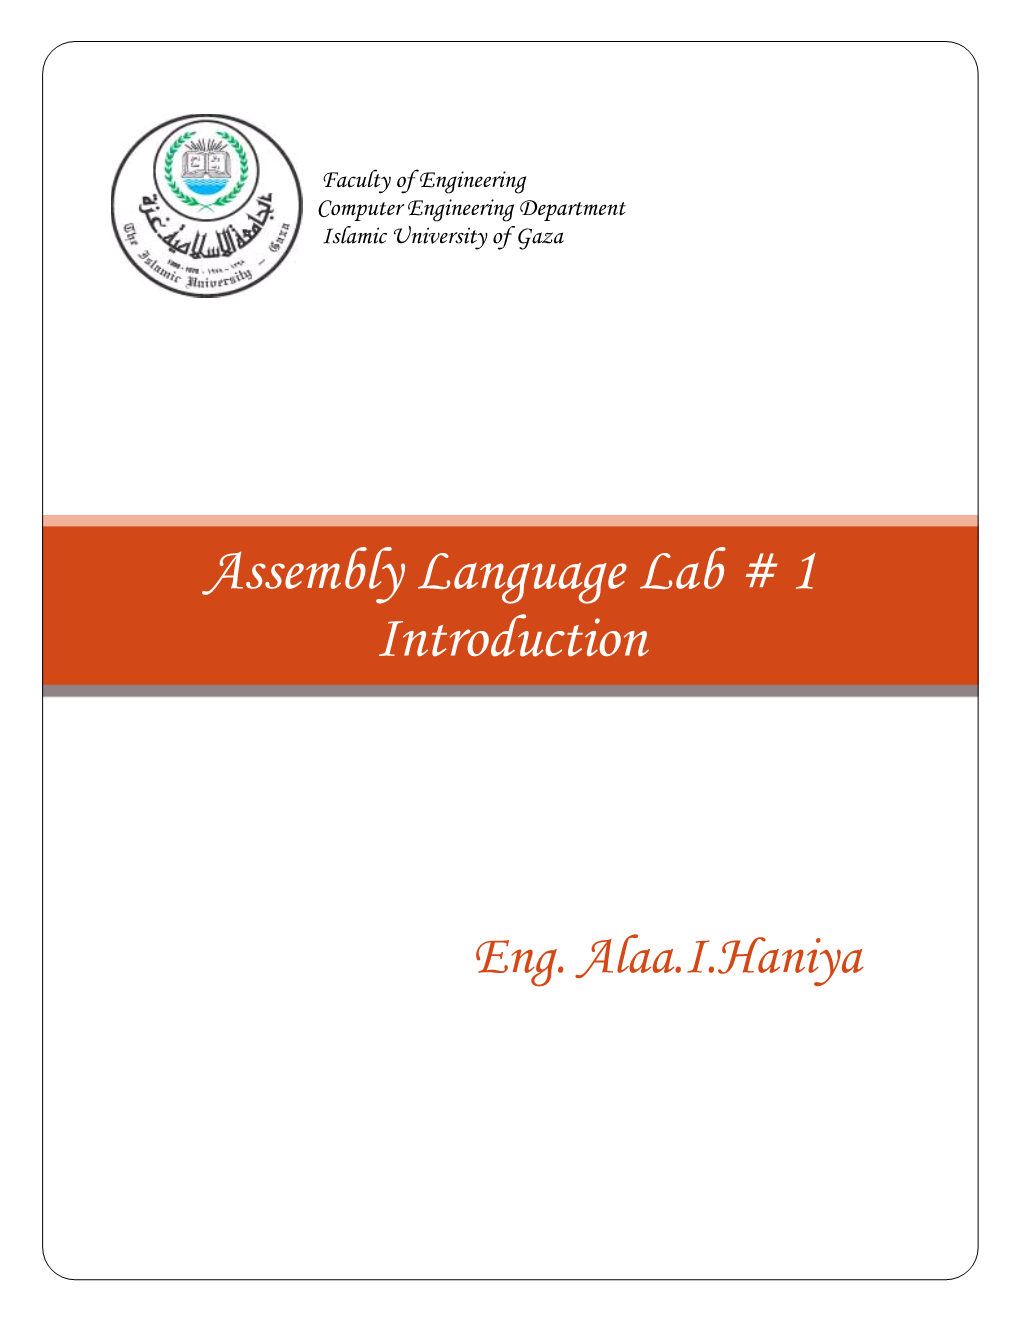 Assembly Language Lab # 1 Introduction